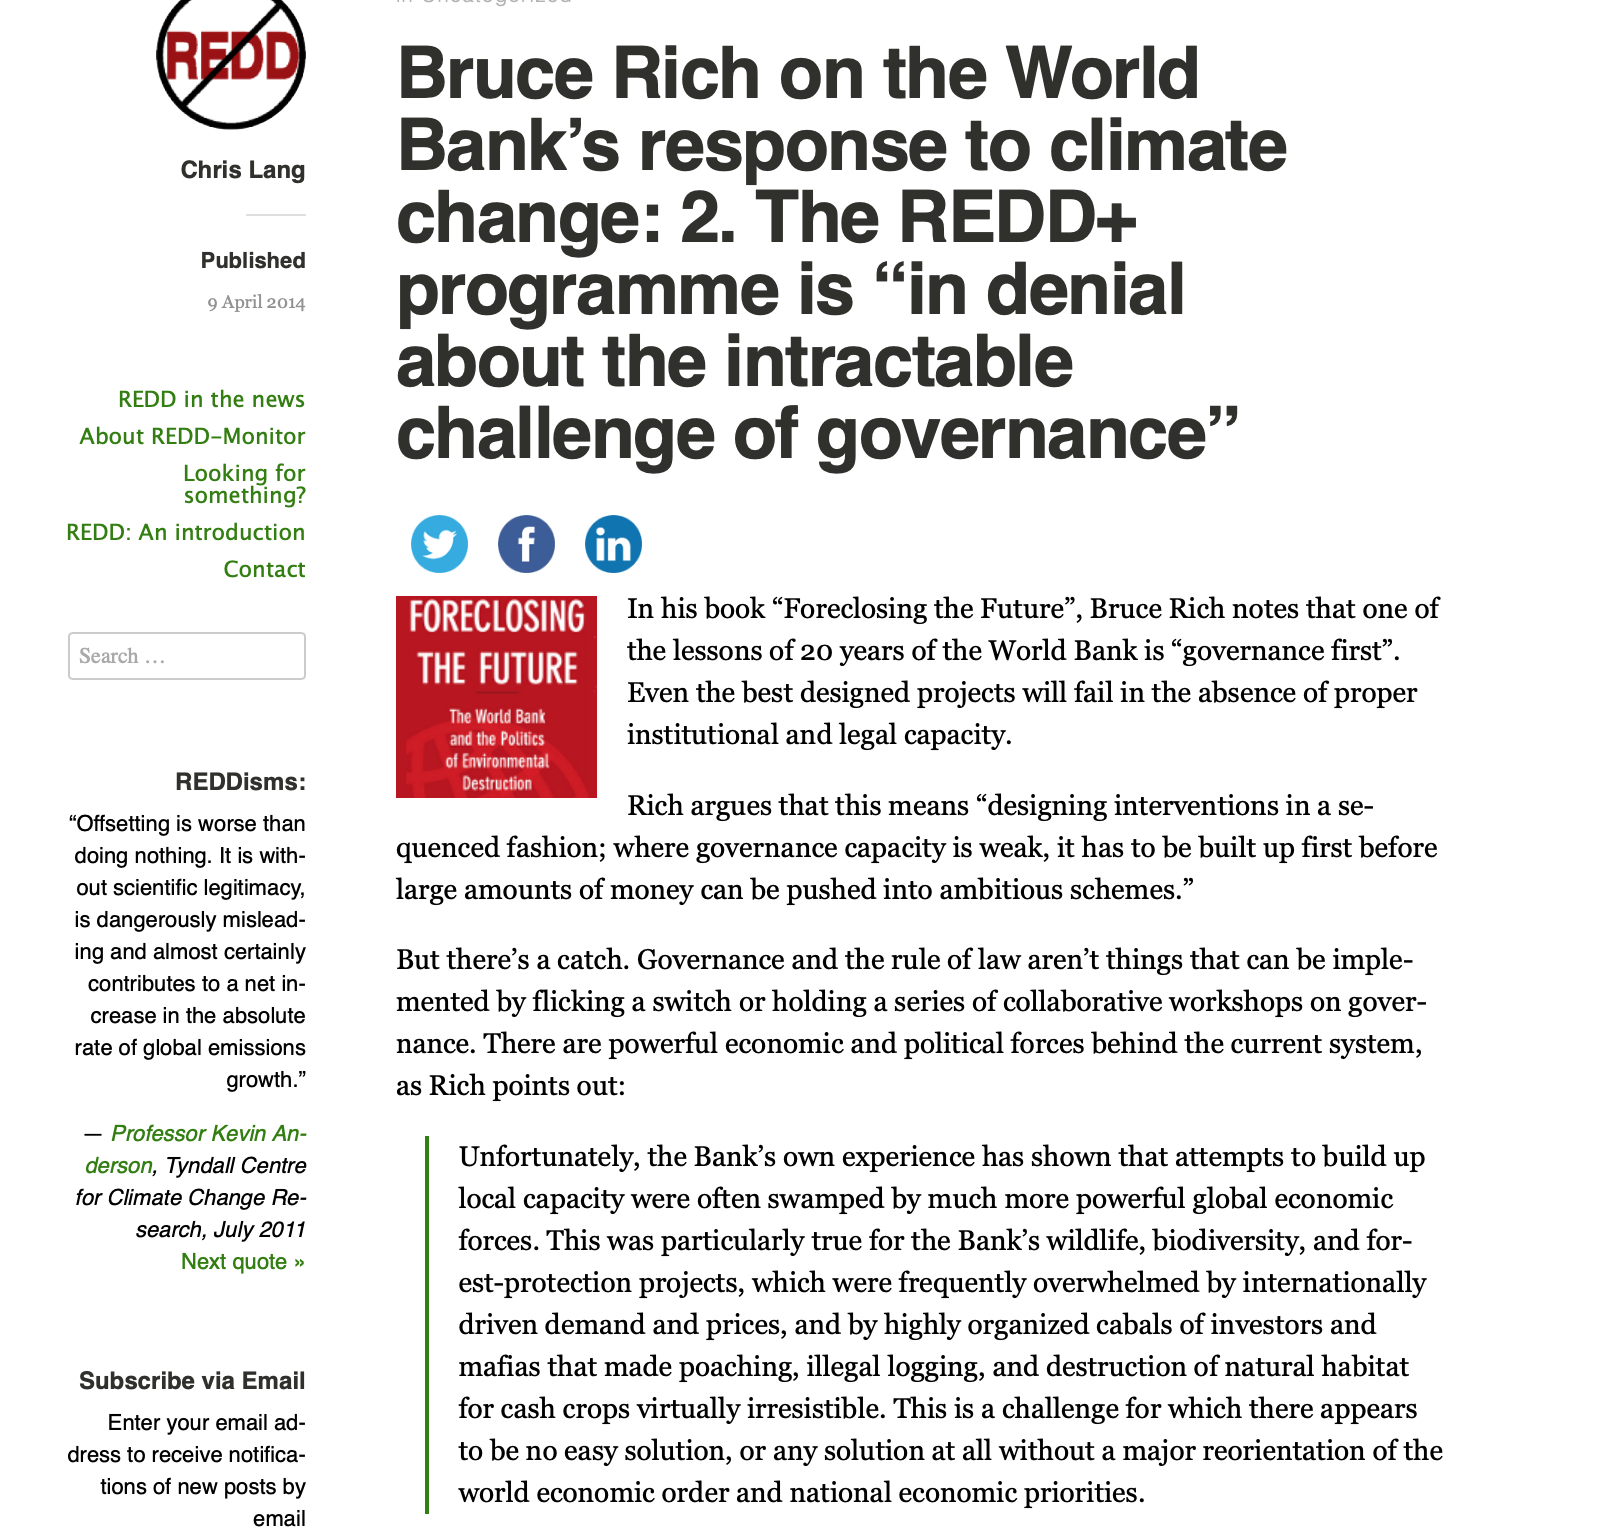 The REDD+ Program is in Denial About the Intractable Problem of Governance